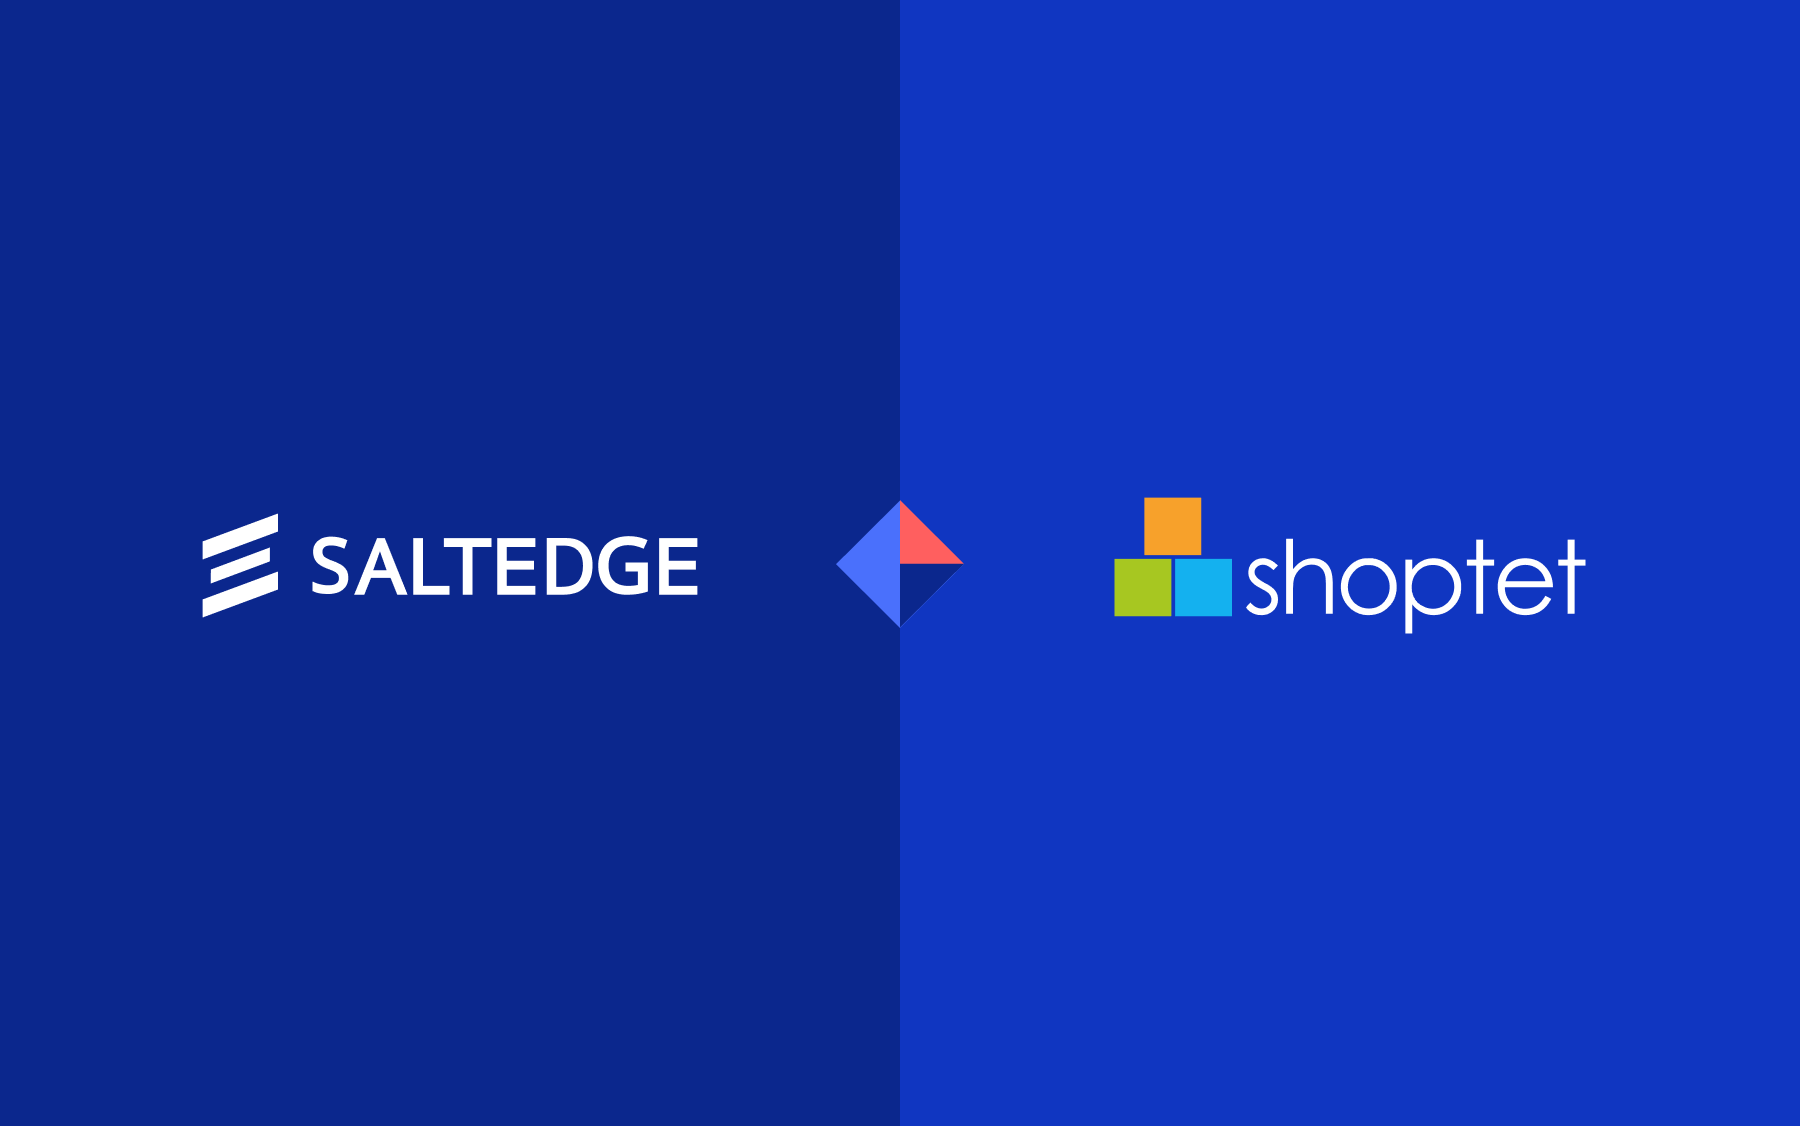 Shoptet Teams Up with Salt Edge to Offer Instant Cardless Payments from Account to Account